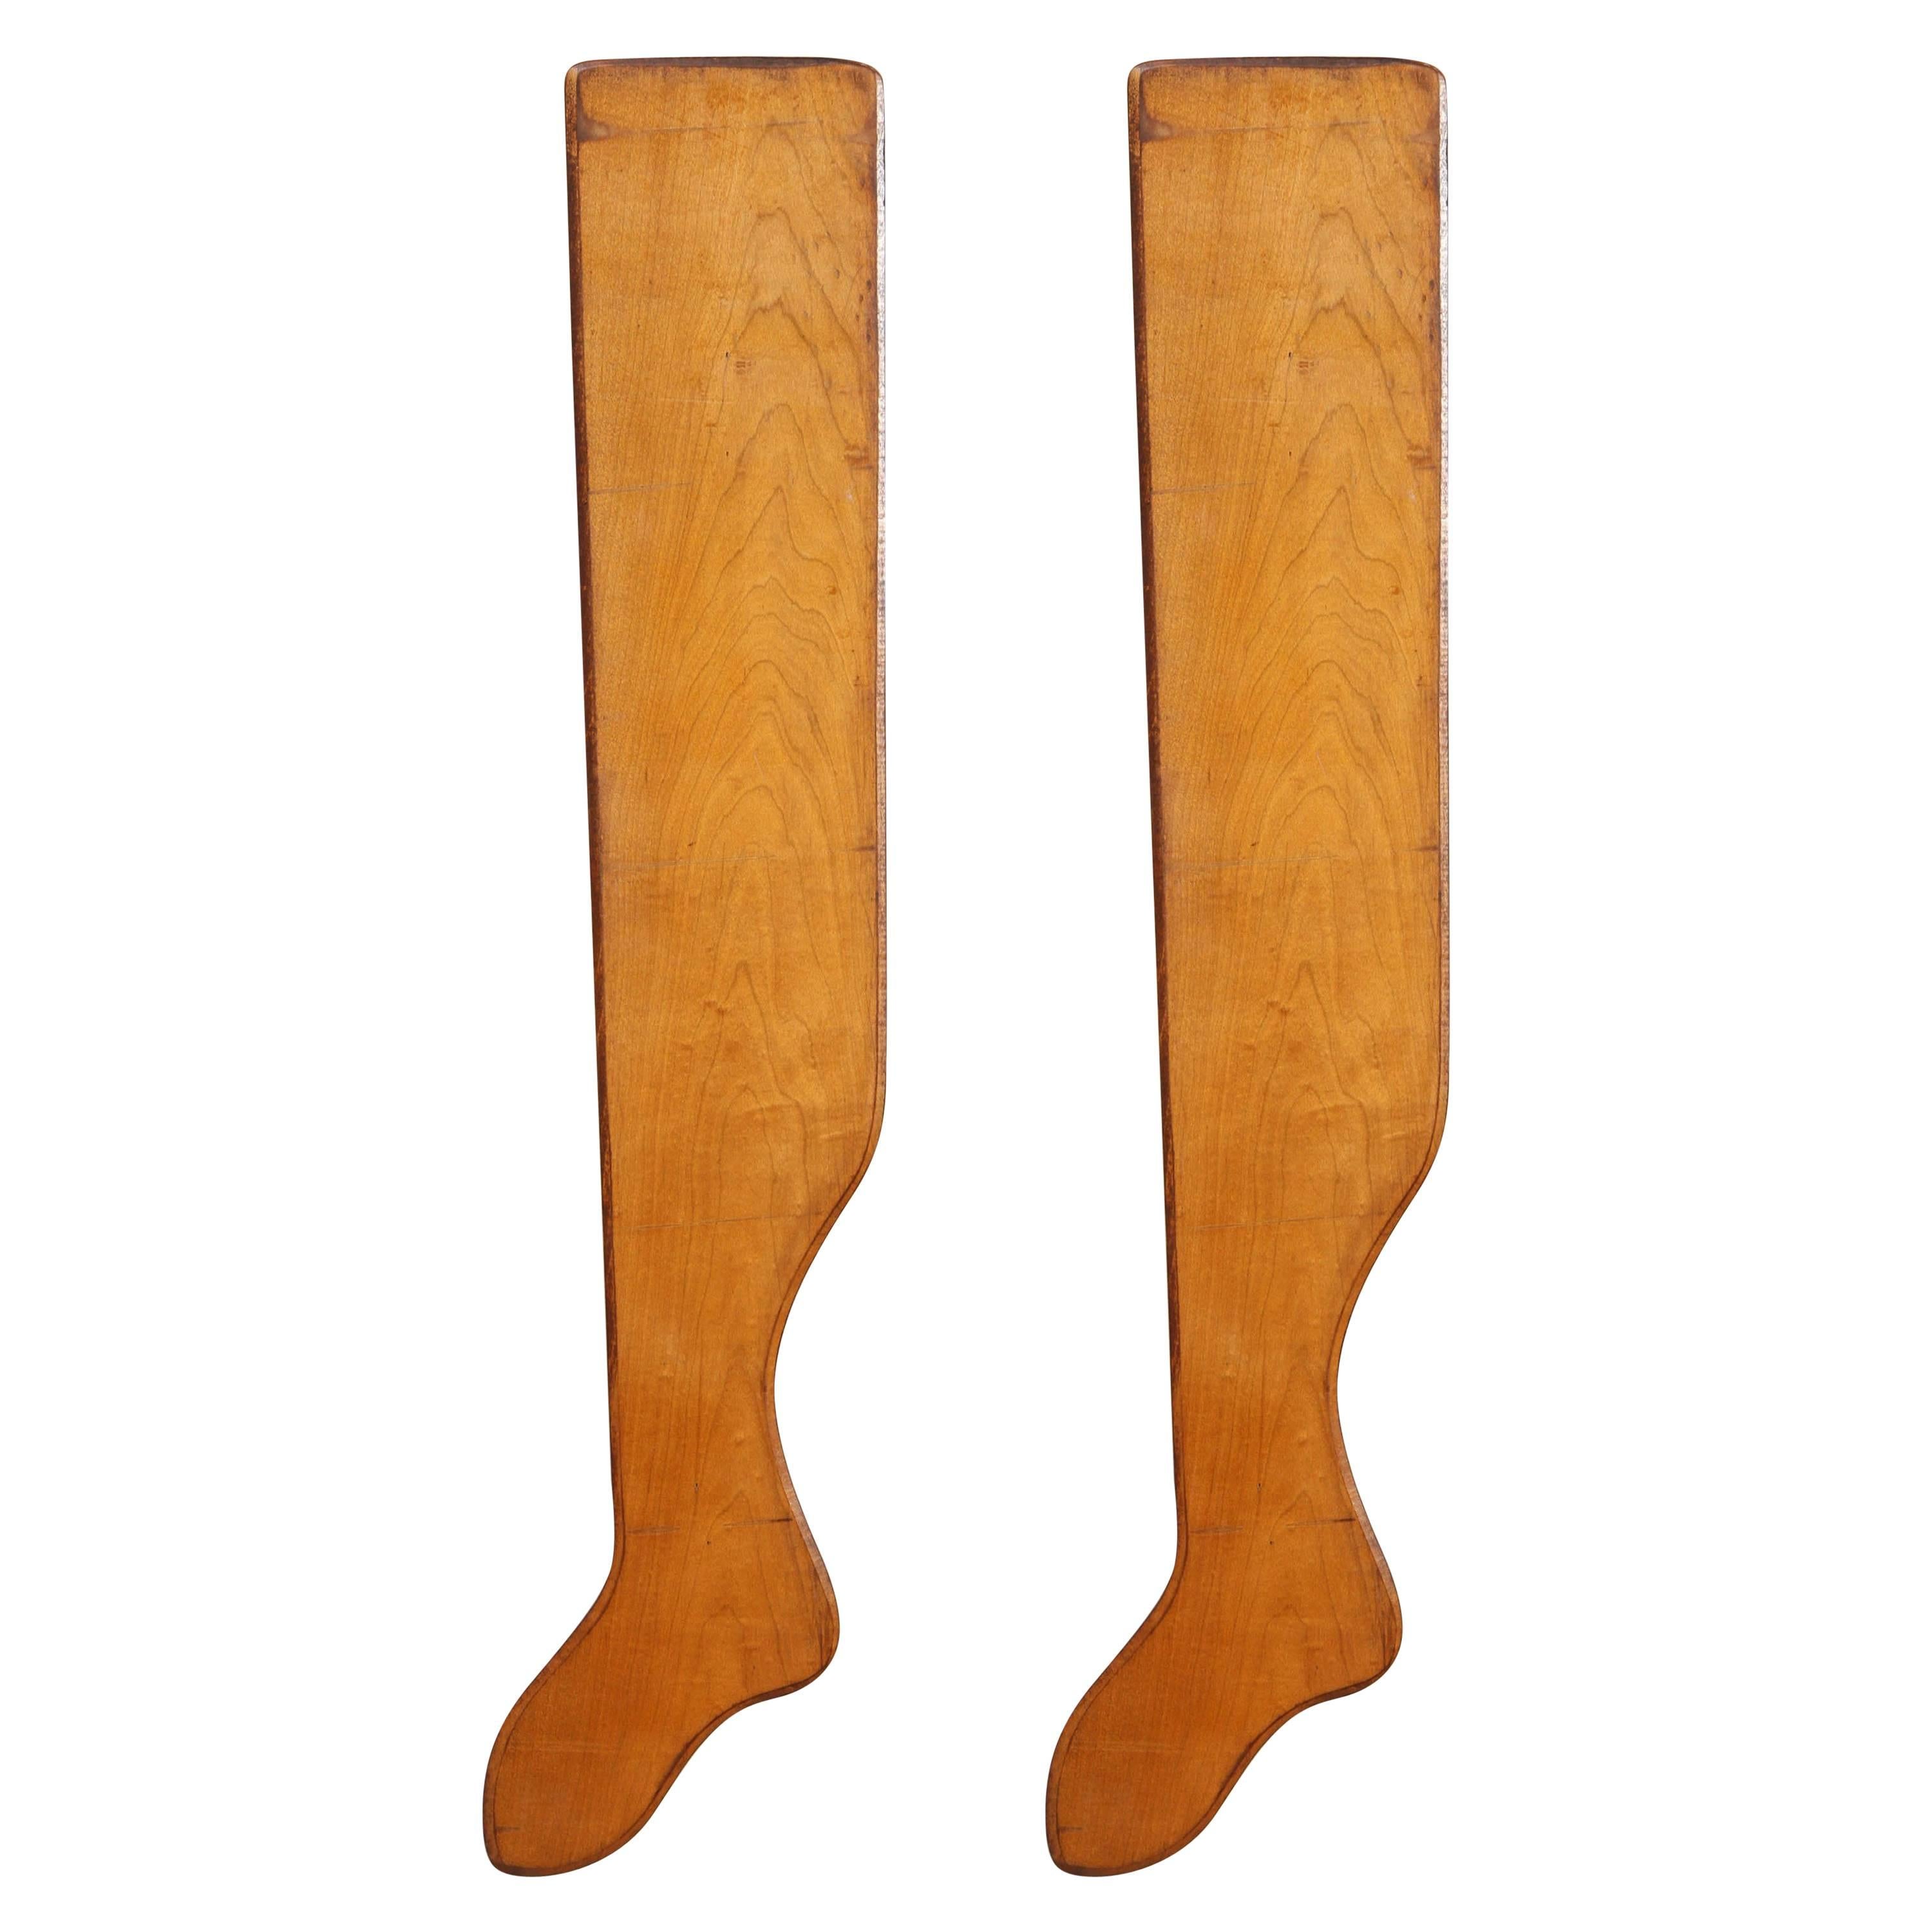 Pair of Wood Stocking Stretchers For Sale